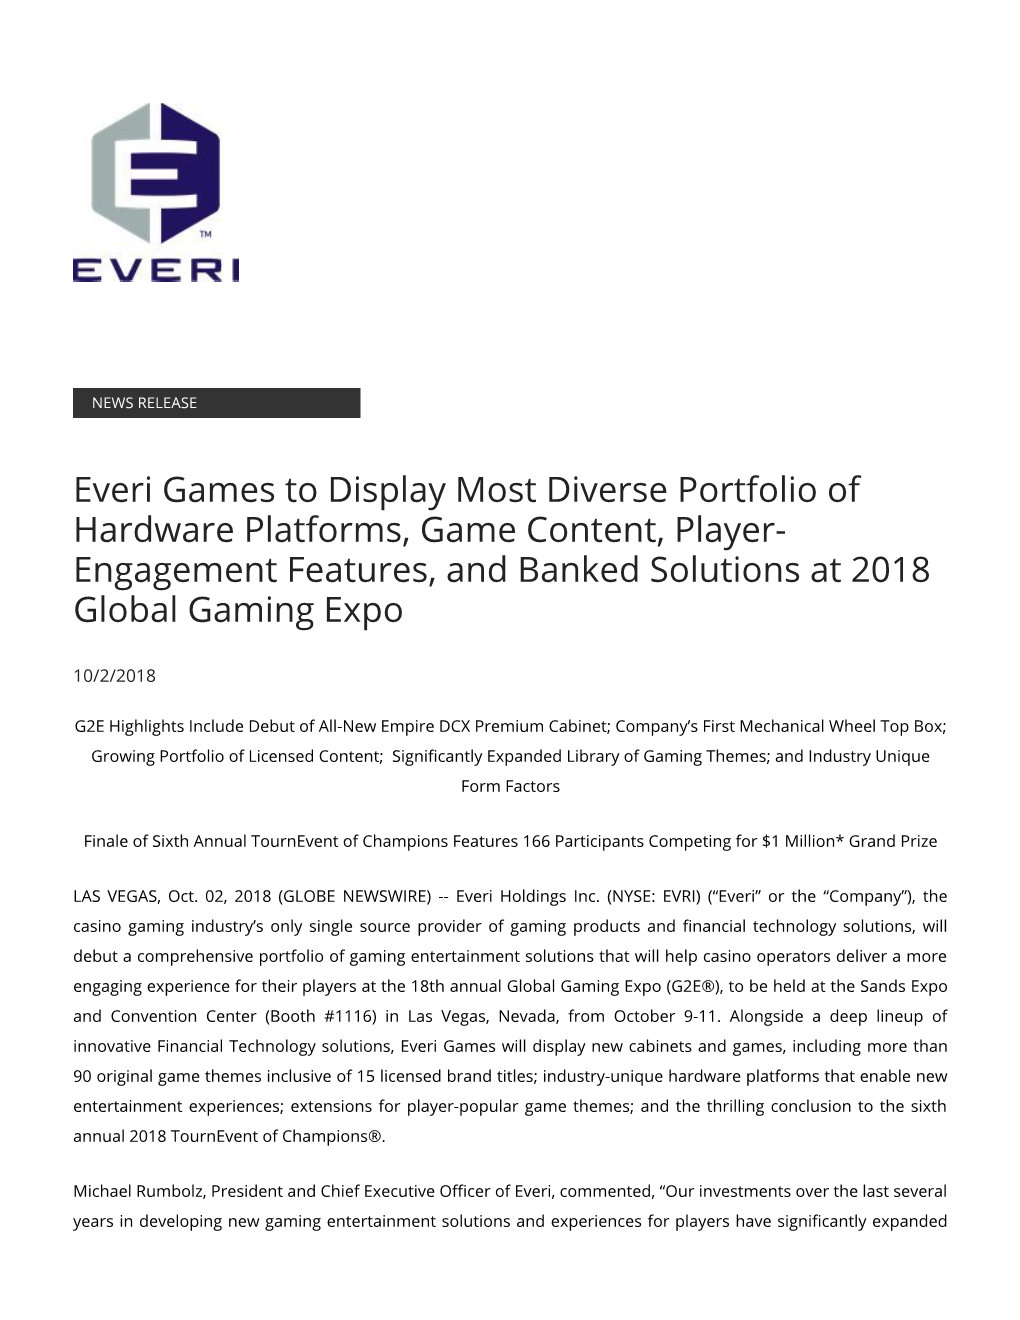 Everi Games to Display Most Diverse Portfolio of Hardware Platforms, Game Content, Player- Engagement Features, and Banked Solutions at 2018 Global Gaming Expo